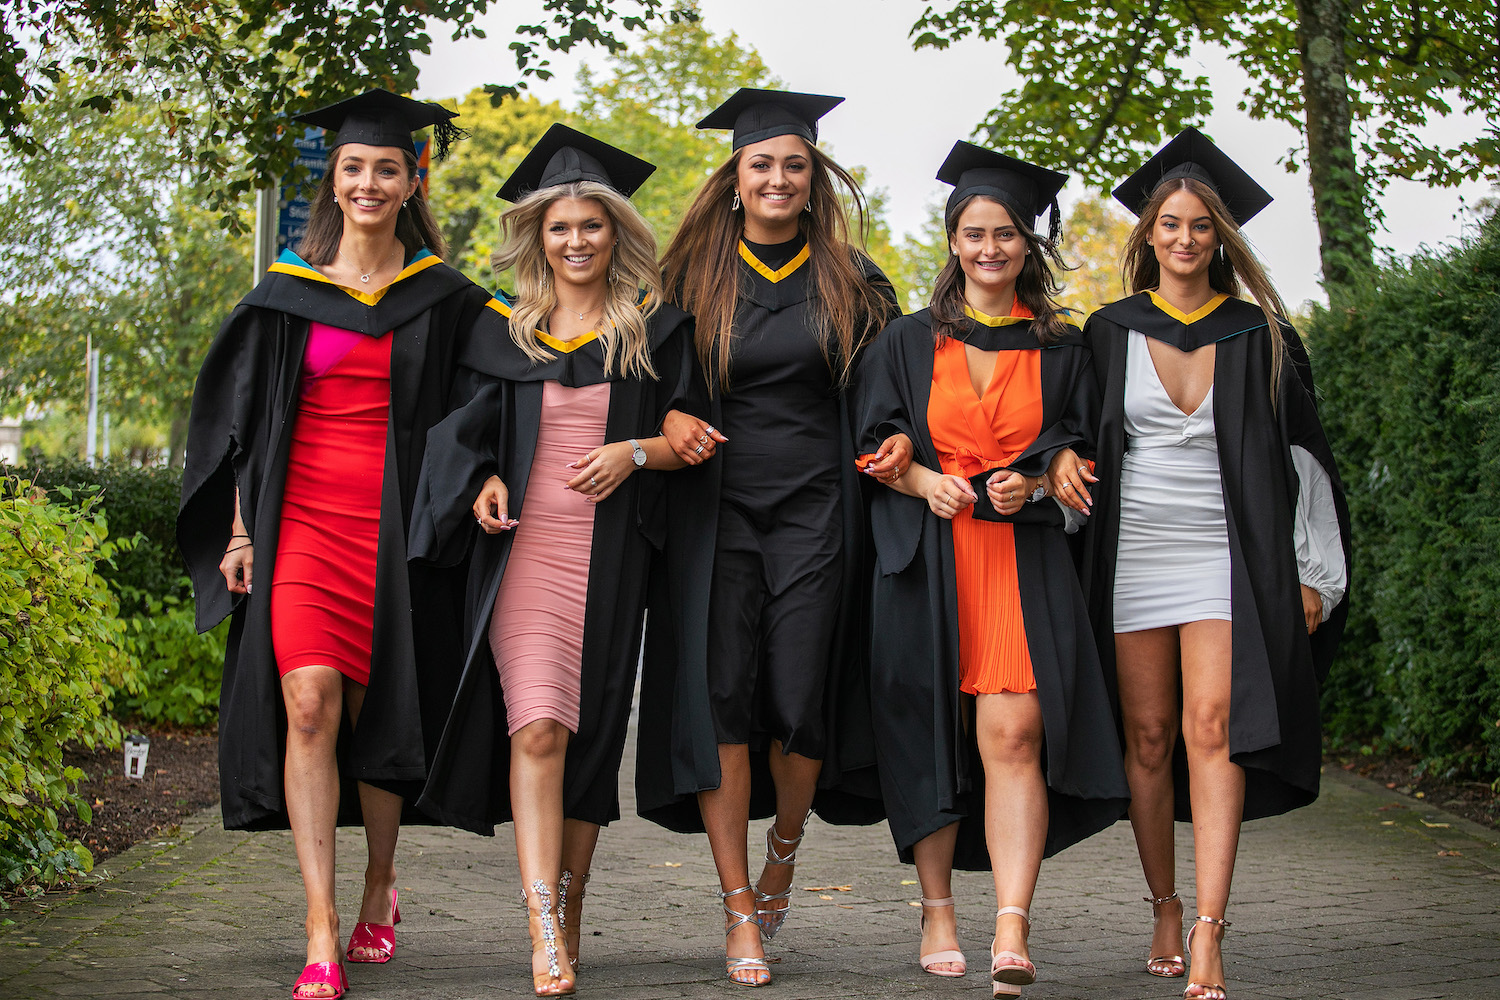 MIC Conferring Ceremonies 2021 - Pictured at the recent Mary Immaculate College conferring ceremonies were Cliodhna O’Connor, Dingle Co Kerry, Danielle Devery, Galway, Tara Gleeson, Tulla Co Clare, Emer Walsh, Ballylongford Co Kerry and Megan Corry, Askeaton Co Limerick. Picture: Arthur Ellis.